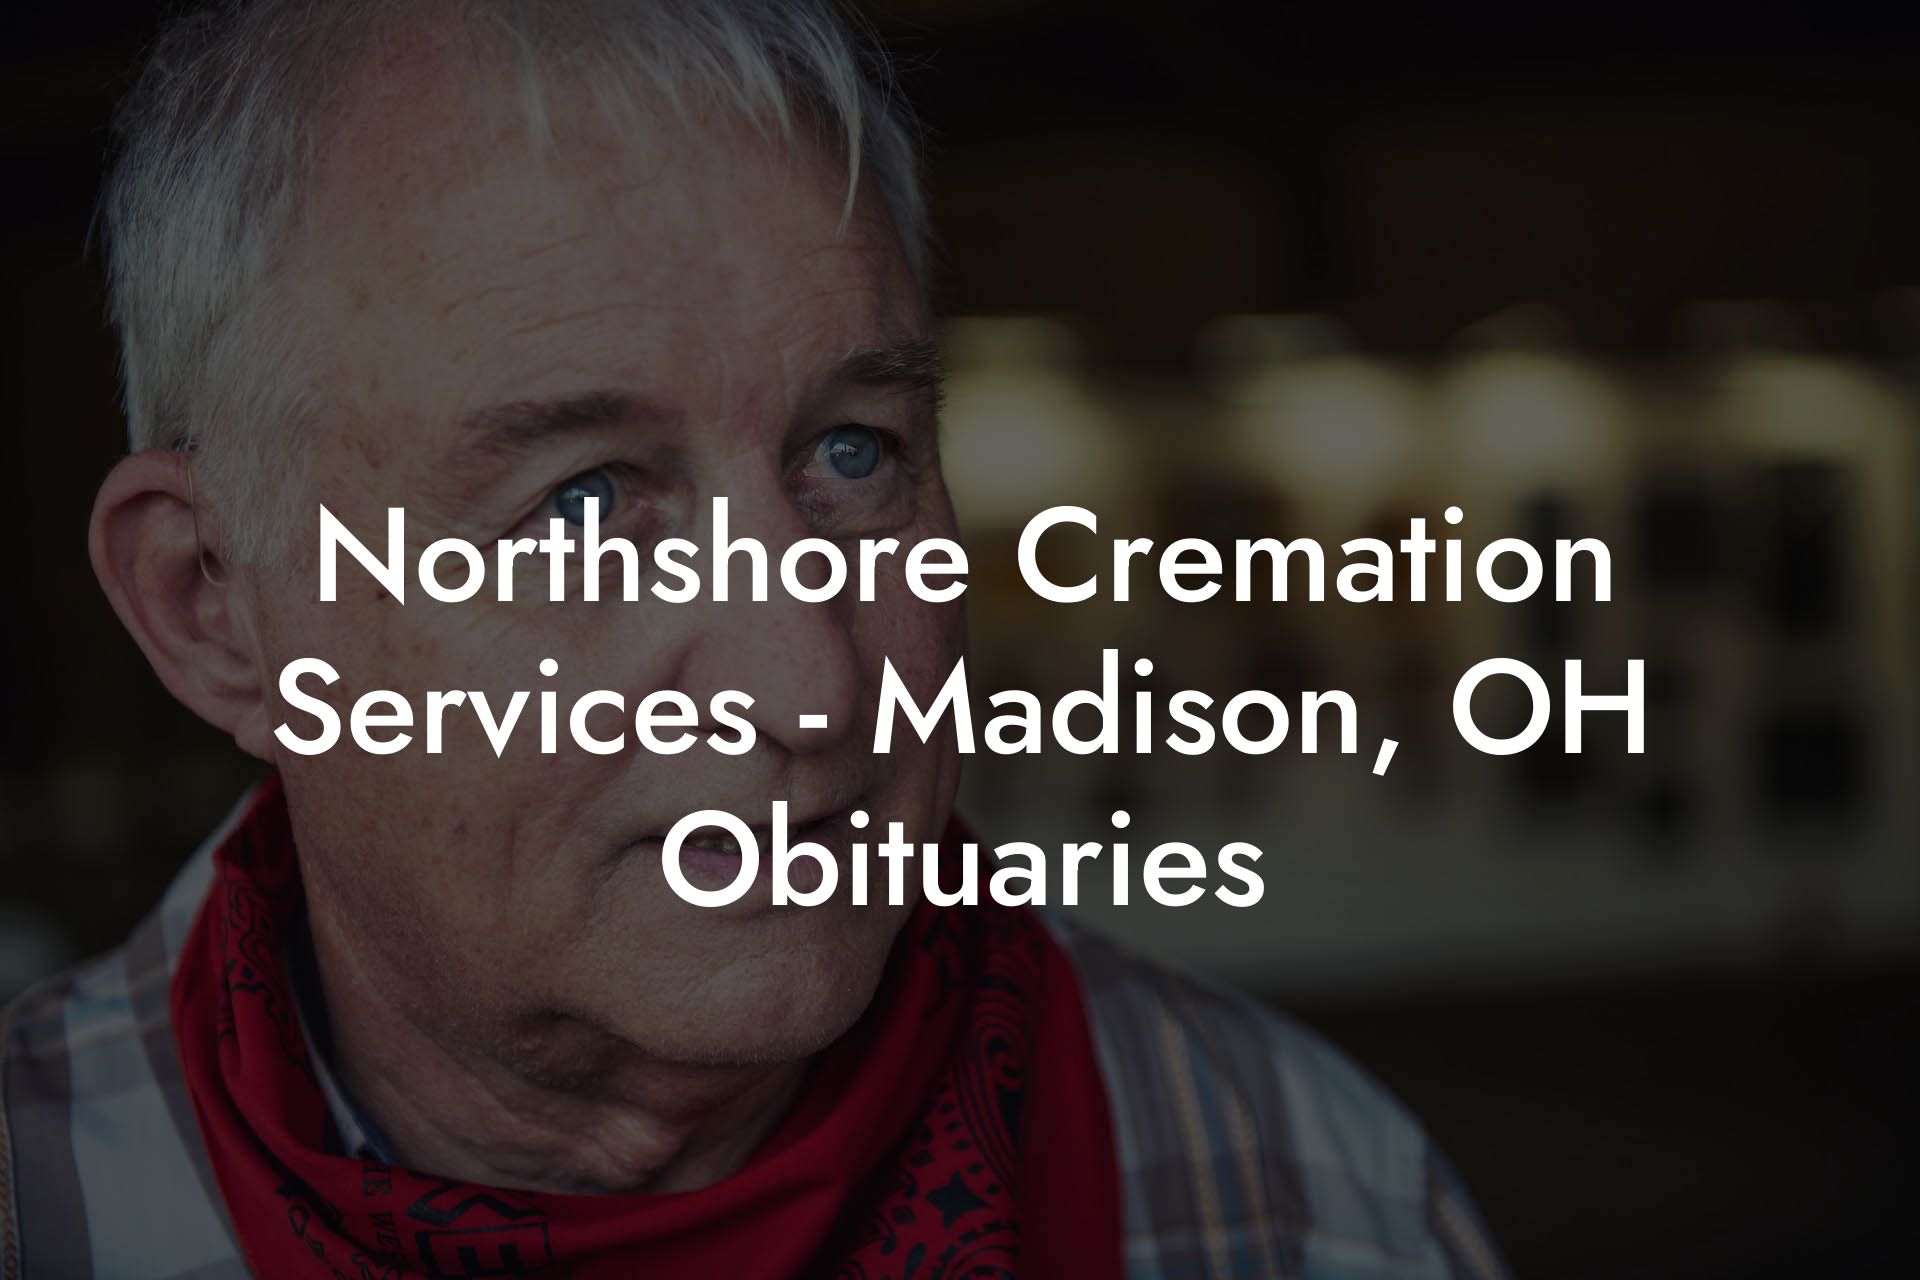 Northshore Cremation Services - Madison, OH Obituaries